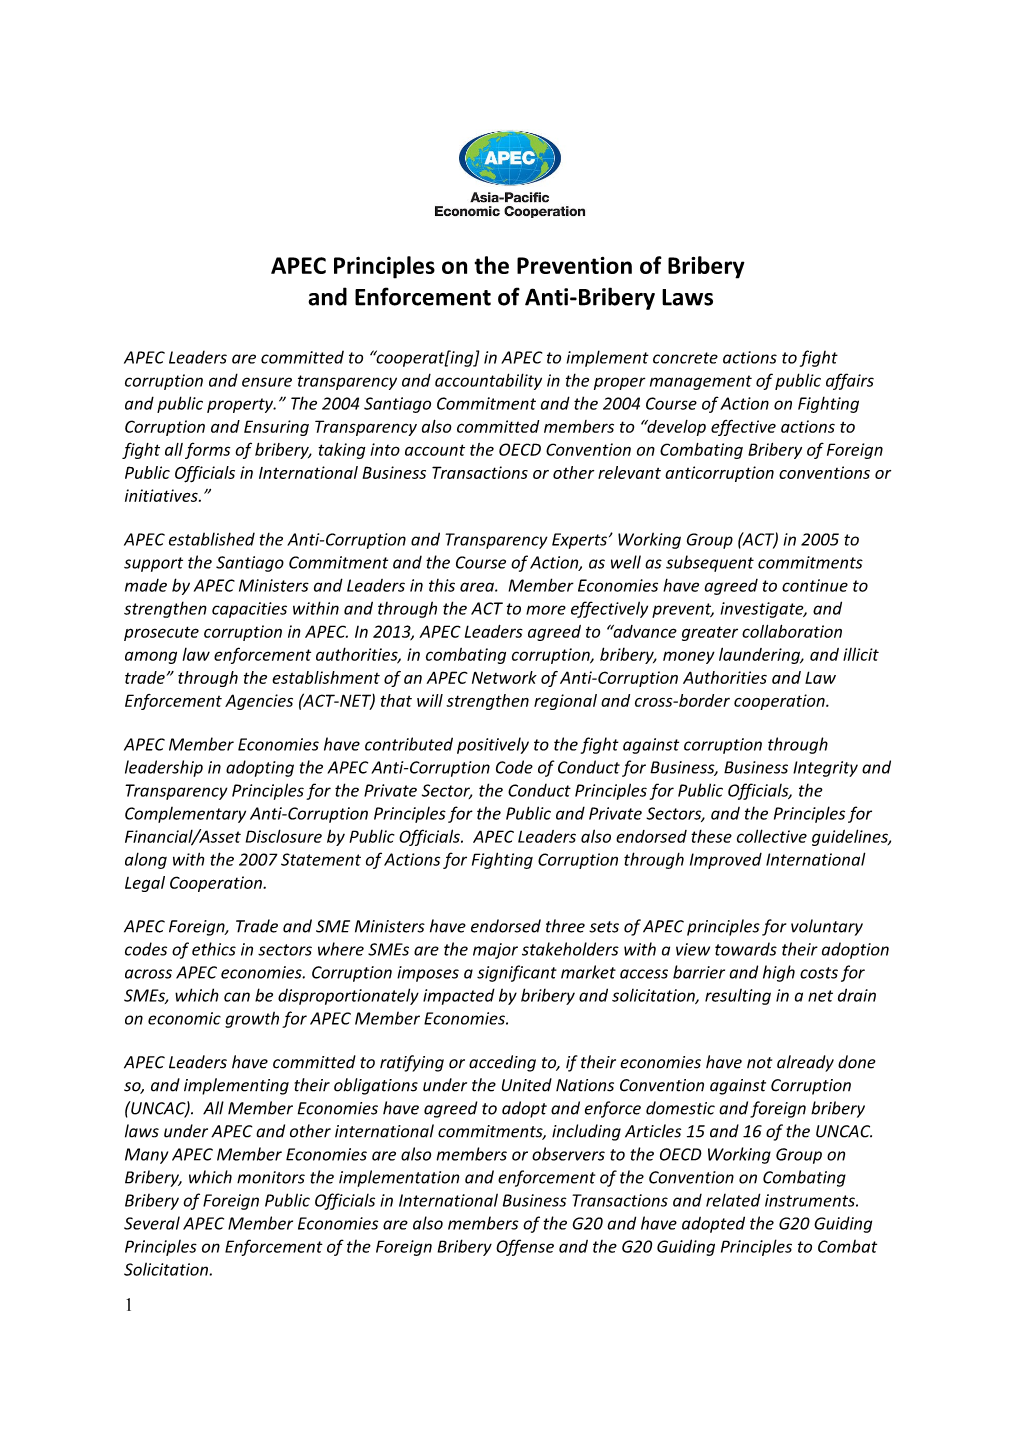 APEC Principles on the Prevention of Bribery